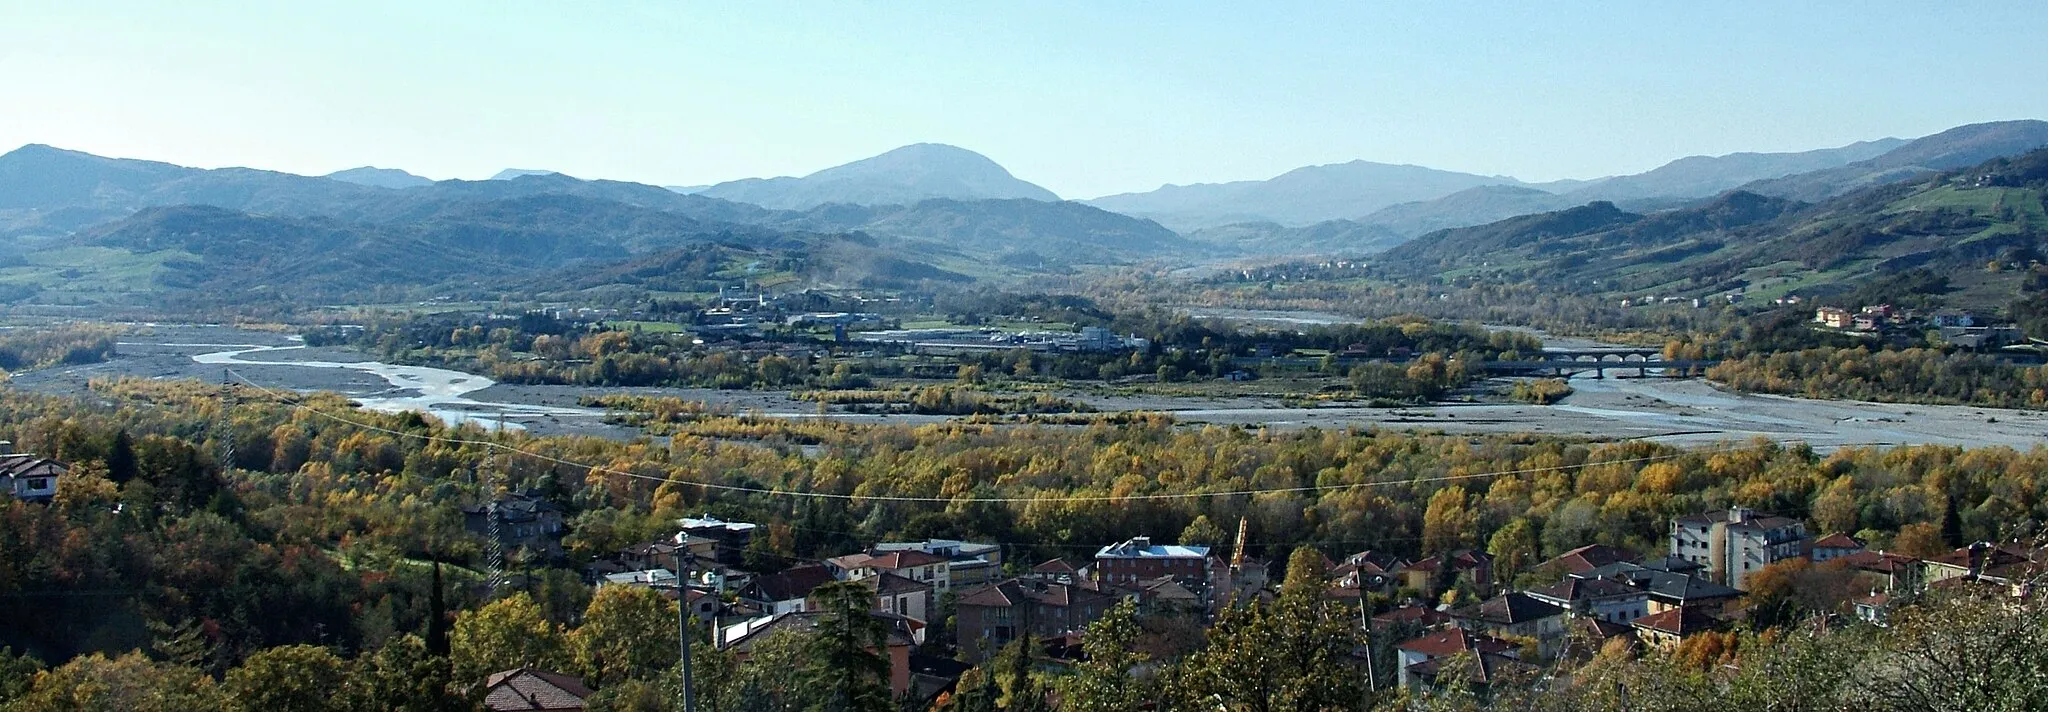 Photo showing: Confluence of Ceno river (right) into Taro river (left) at the height of the village of Rubbiano, municipality of Soligano, at the foreground the village of Fornovo di Taro, province of Parma, Italy.